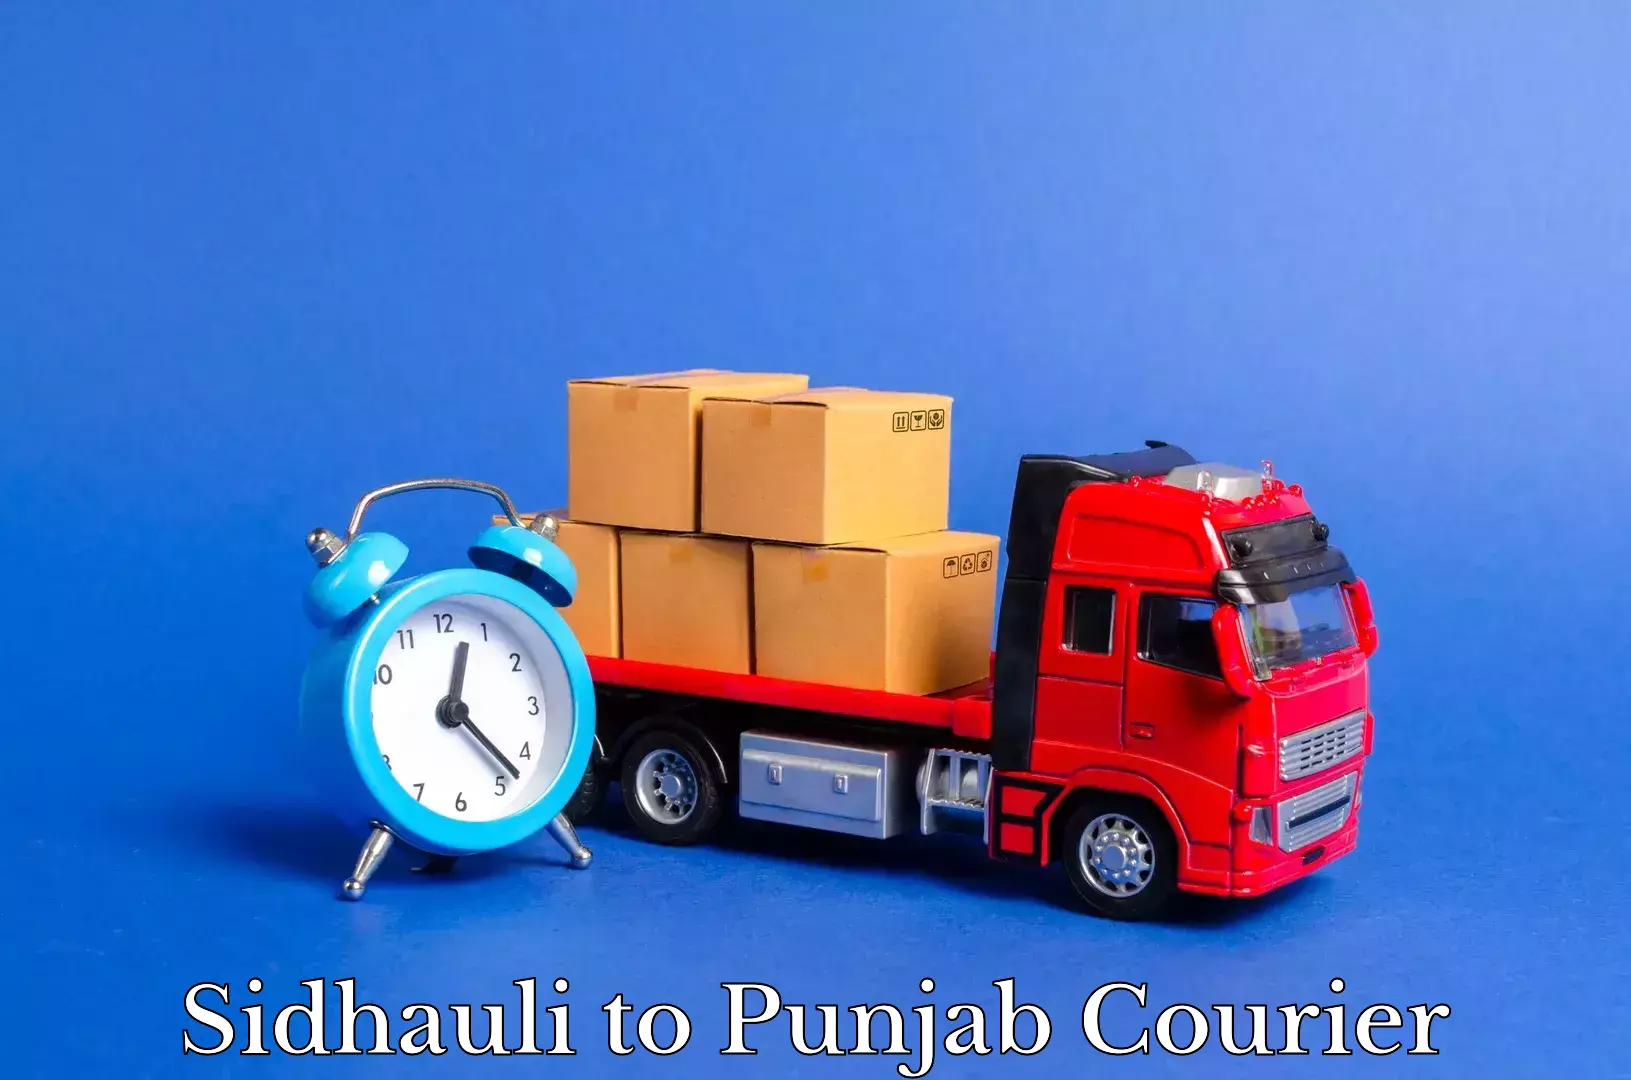 Quality relocation assistance Sidhauli to Goindwal Sahib